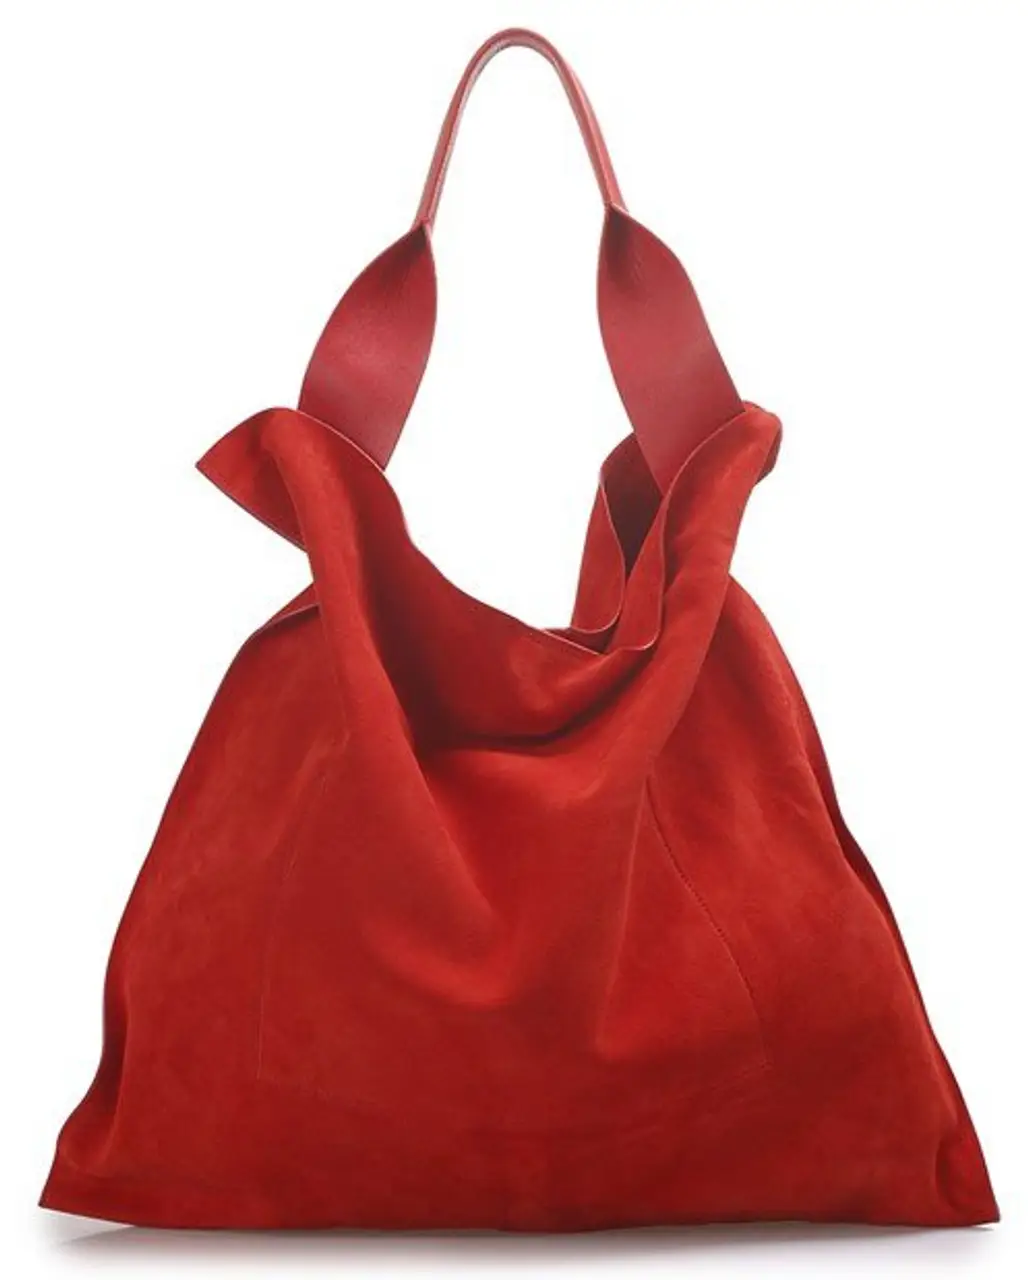 Slouchy Red Bag